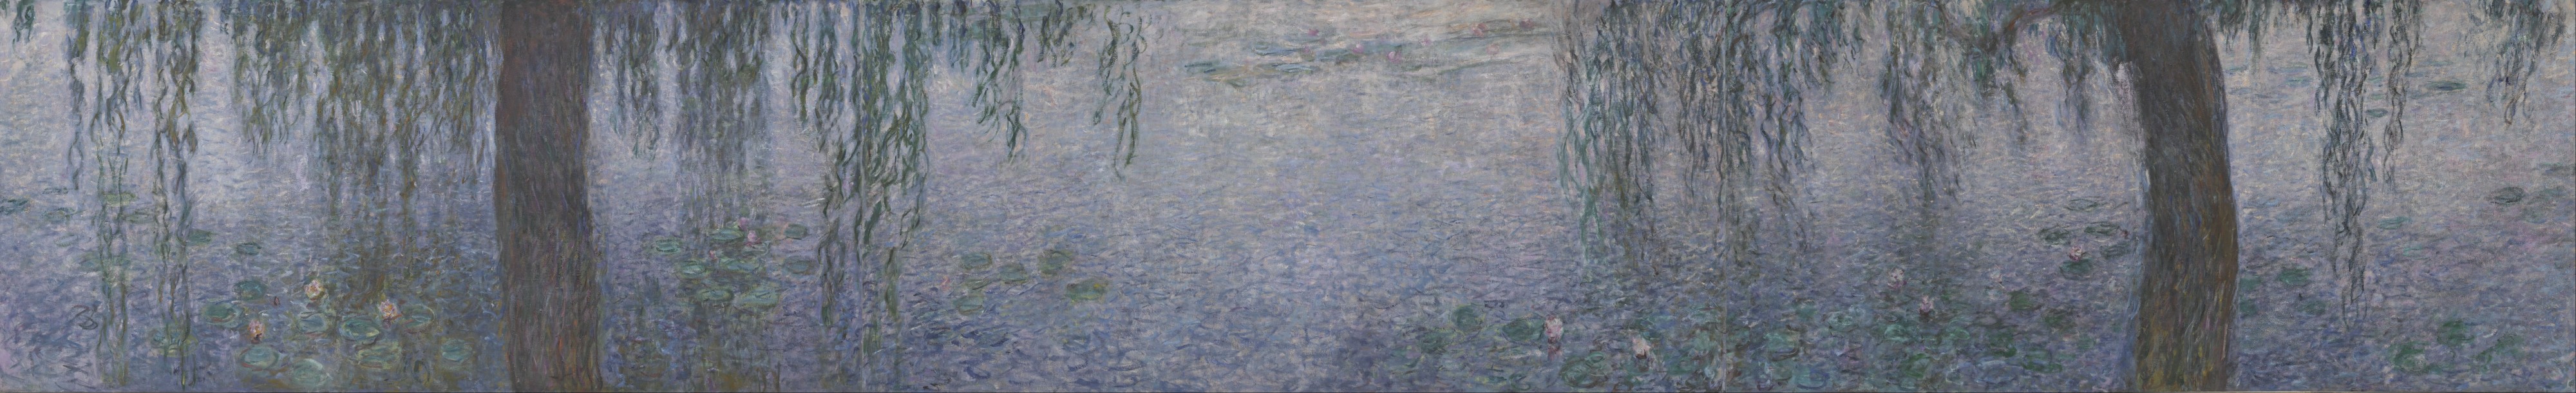 Claude Monet - The Water Lilies - Clear Morning with Willows - Google Art Project